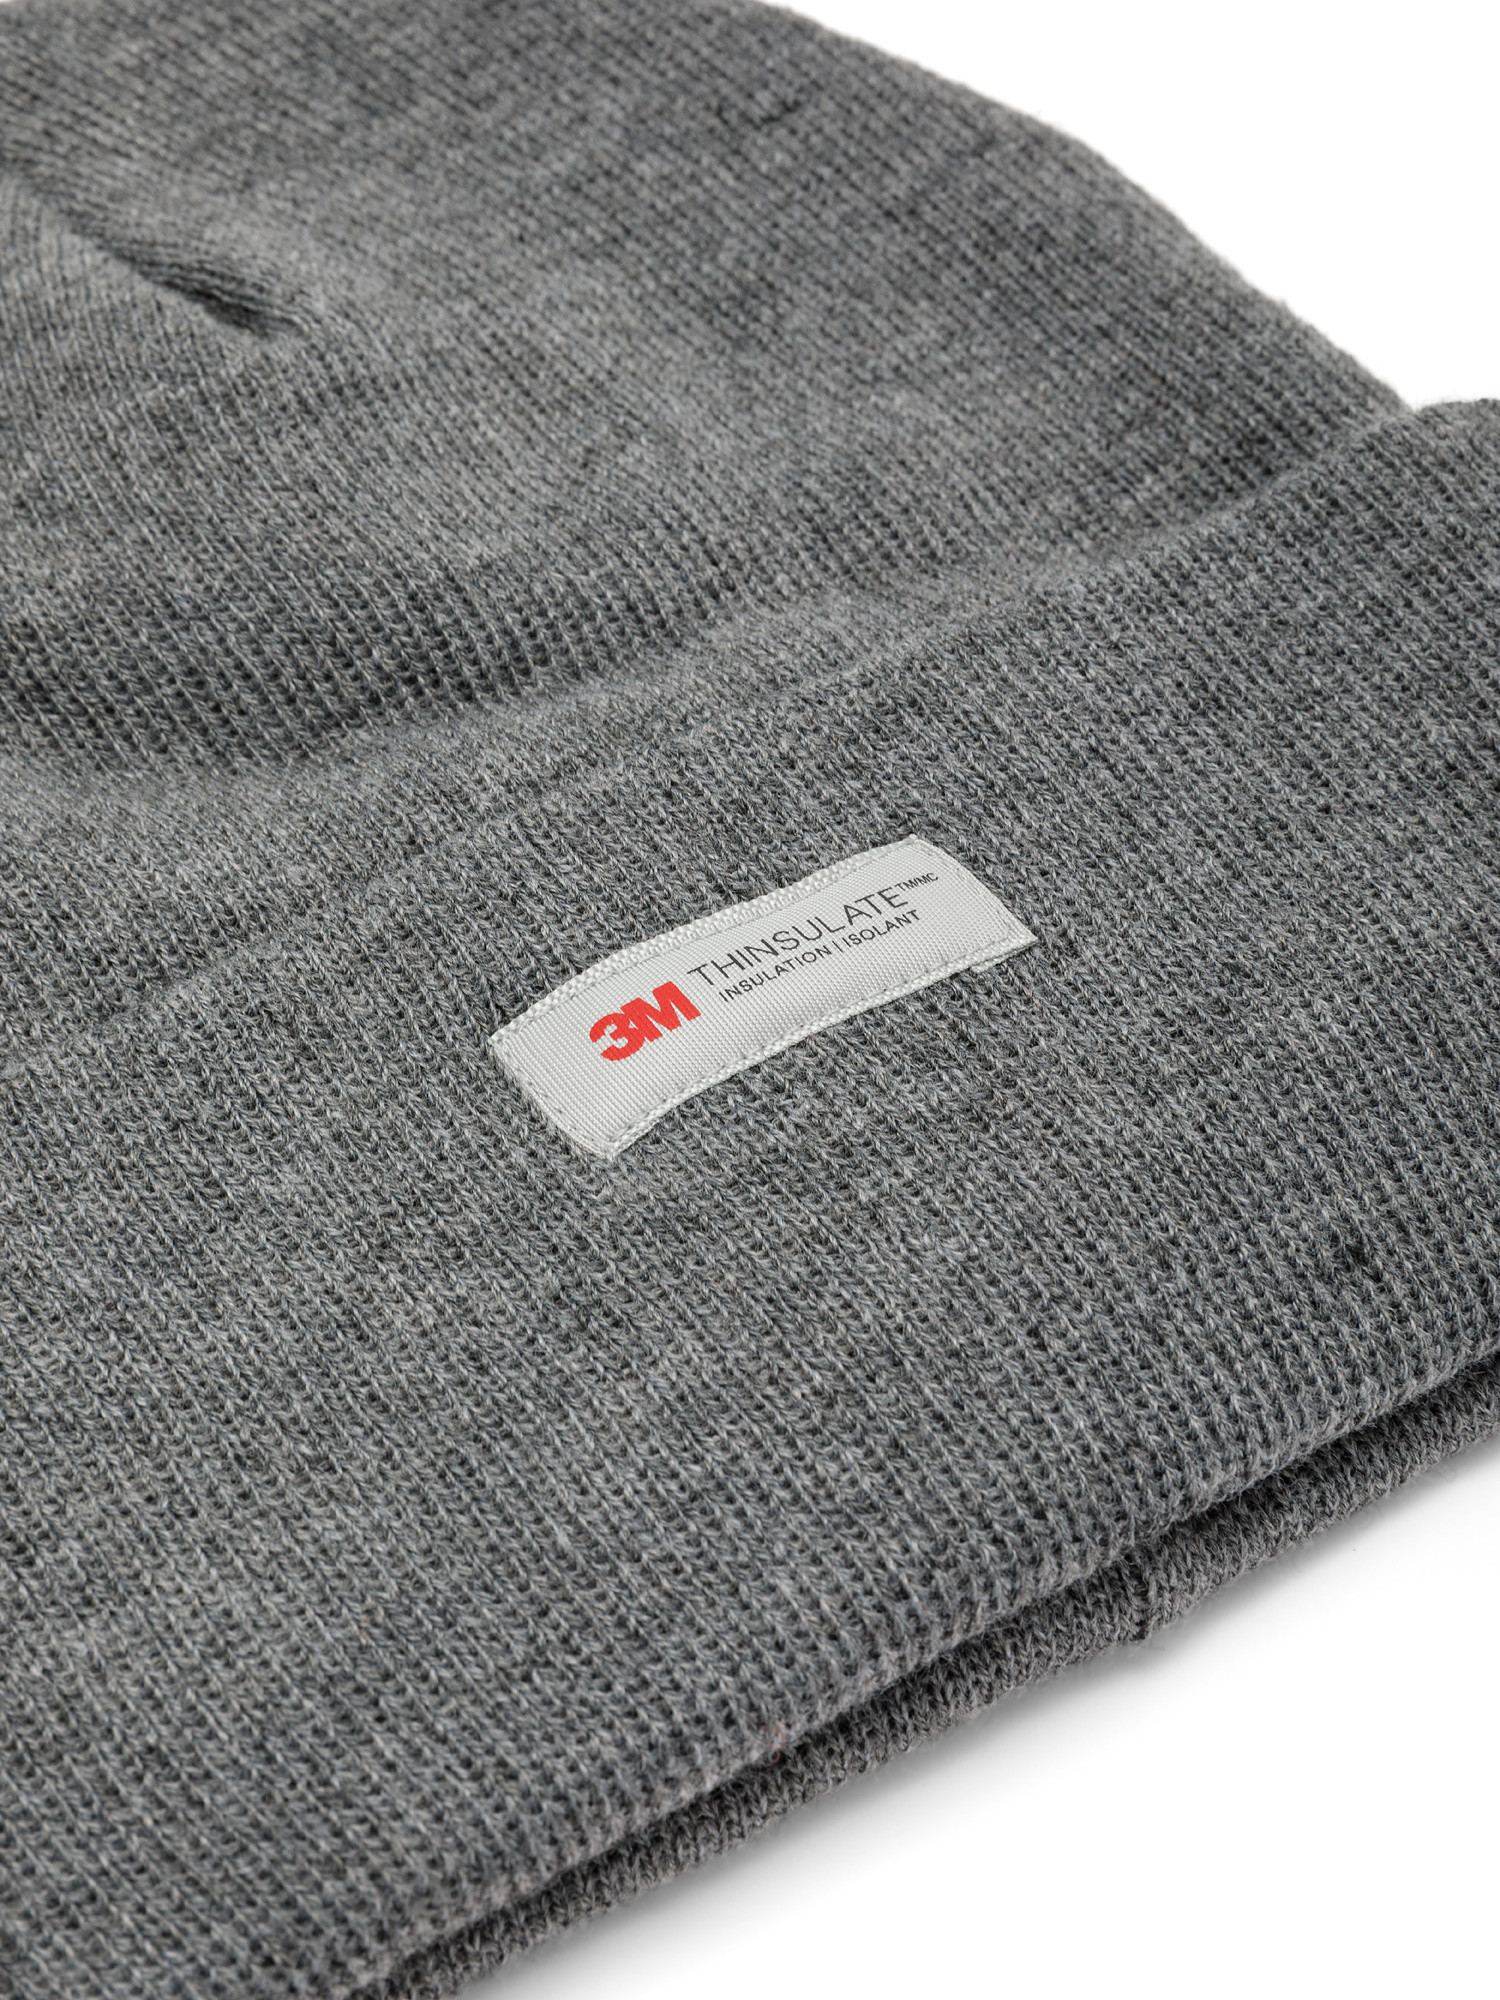 Thinsulate cap, Light Grey, large image number 1